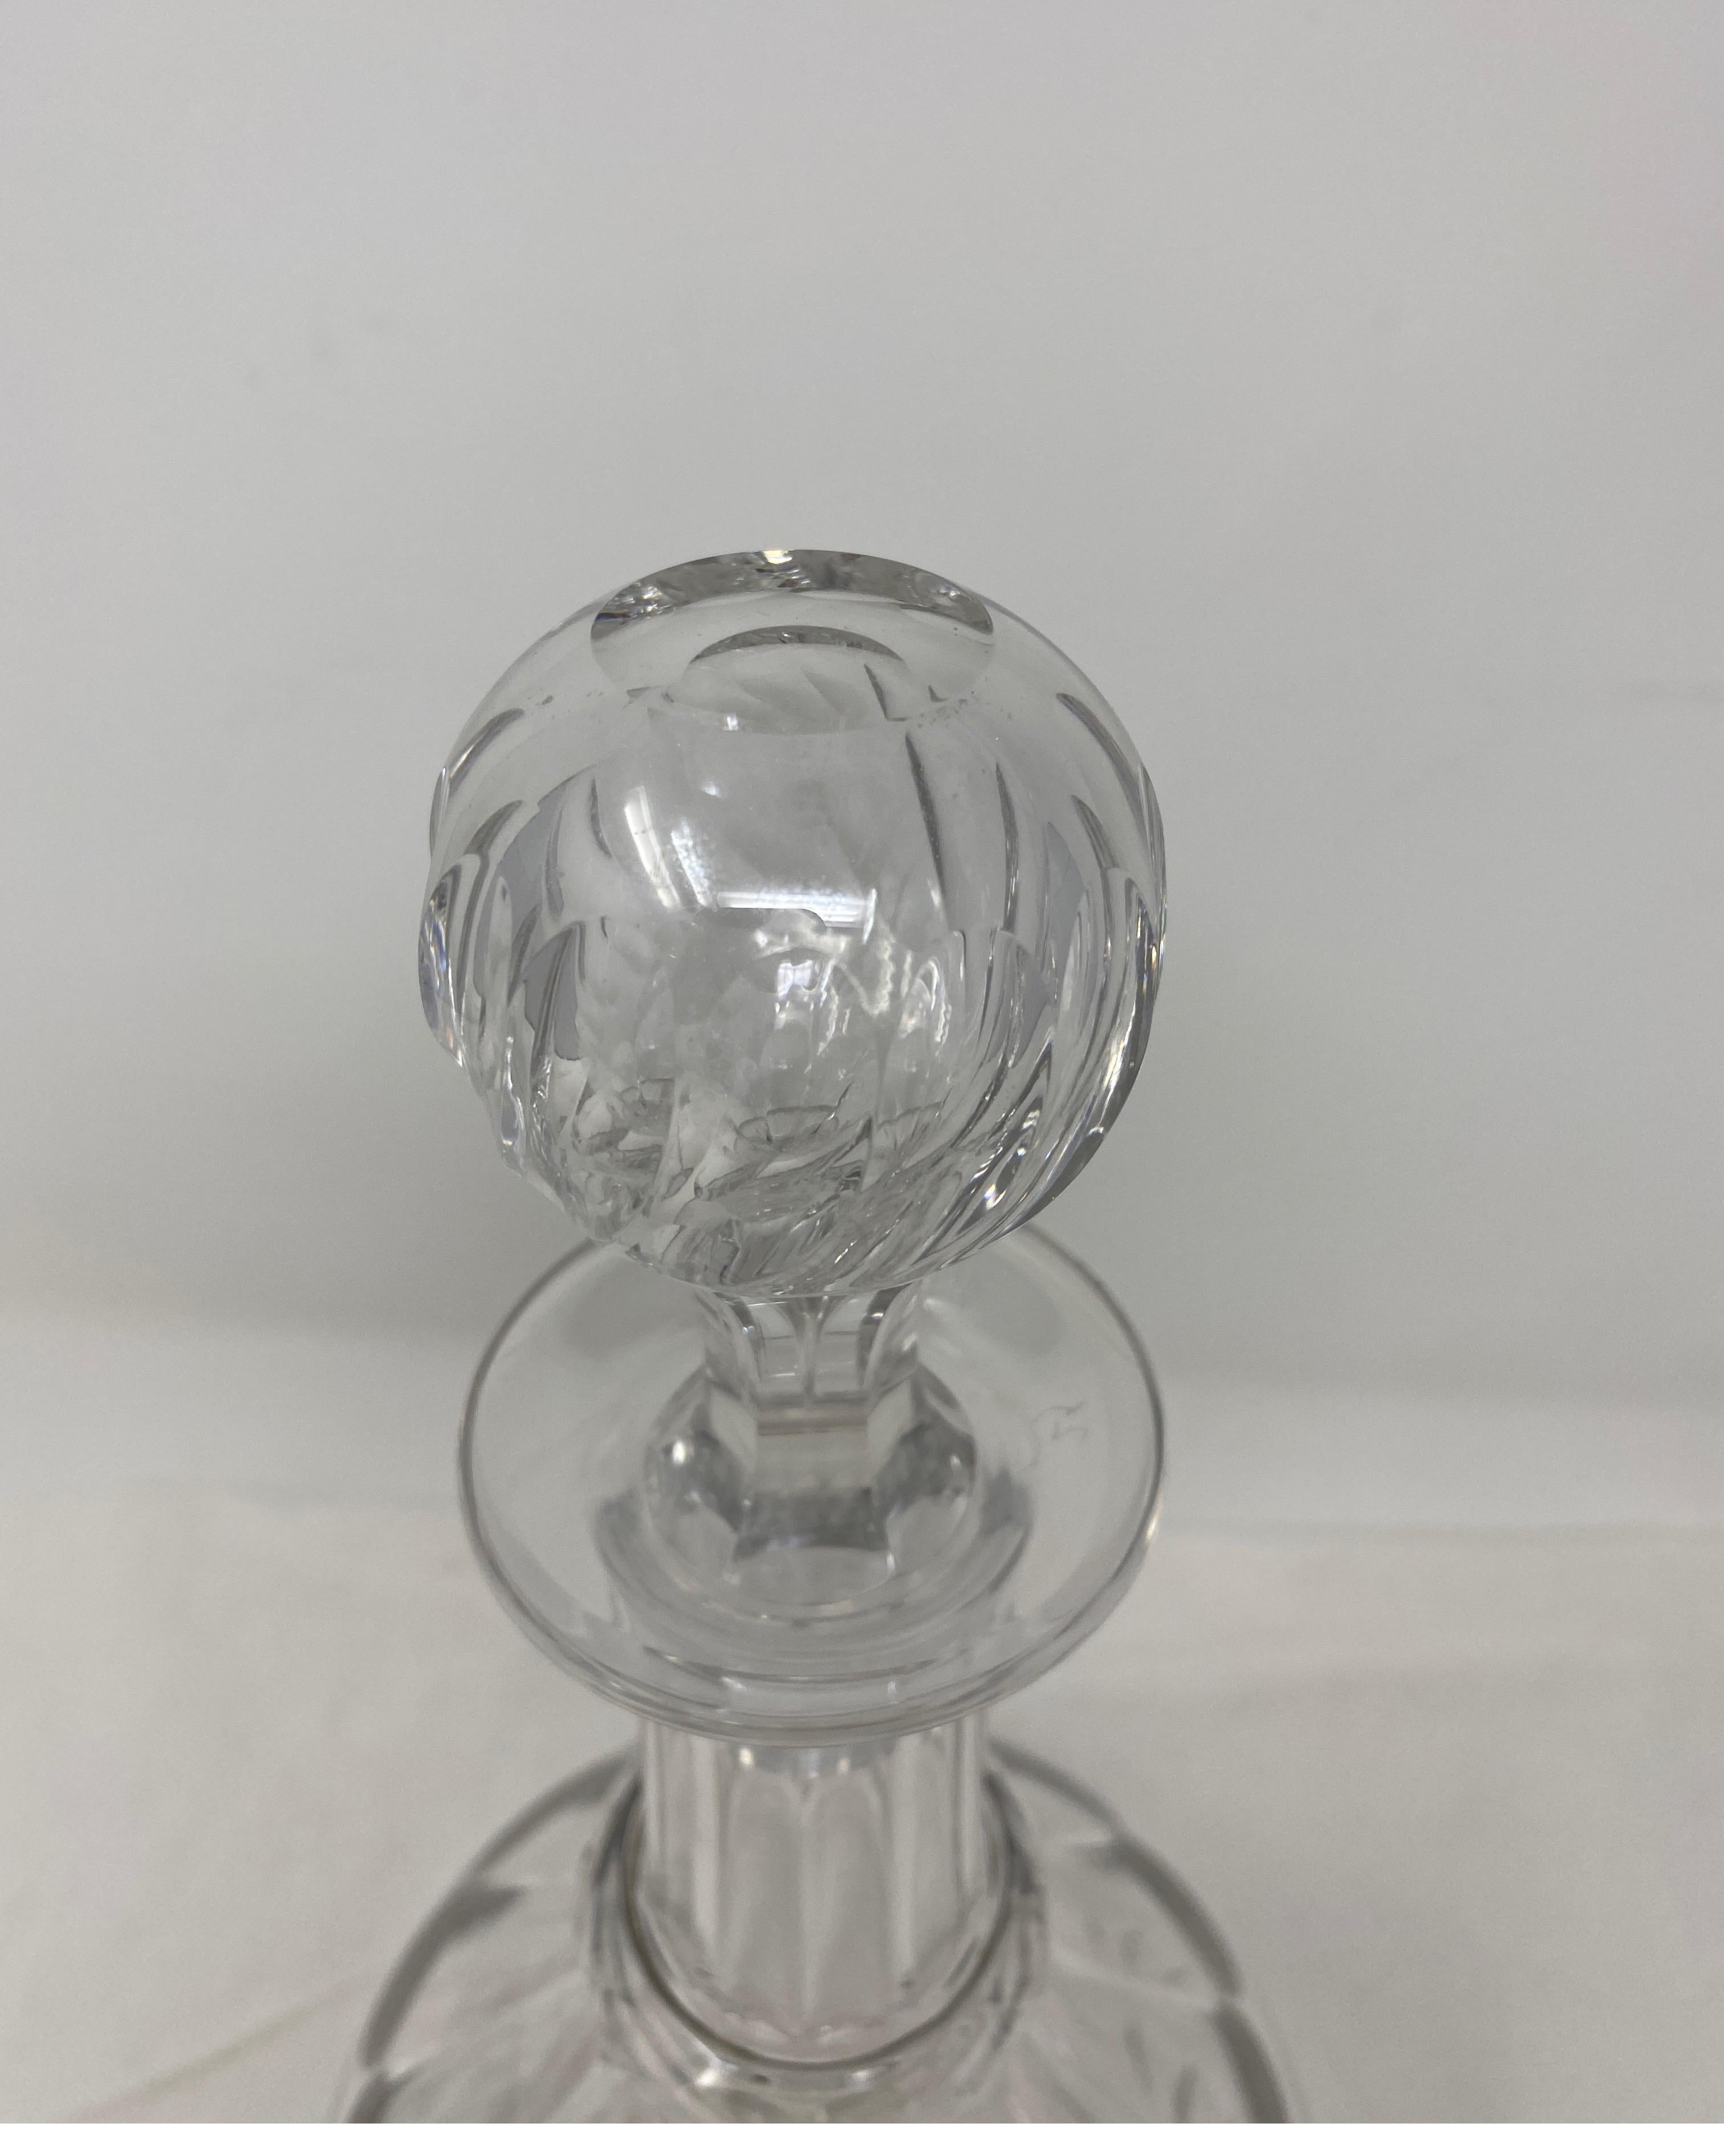 Antique Baccarat crystal decanter with stopper, 19th century.